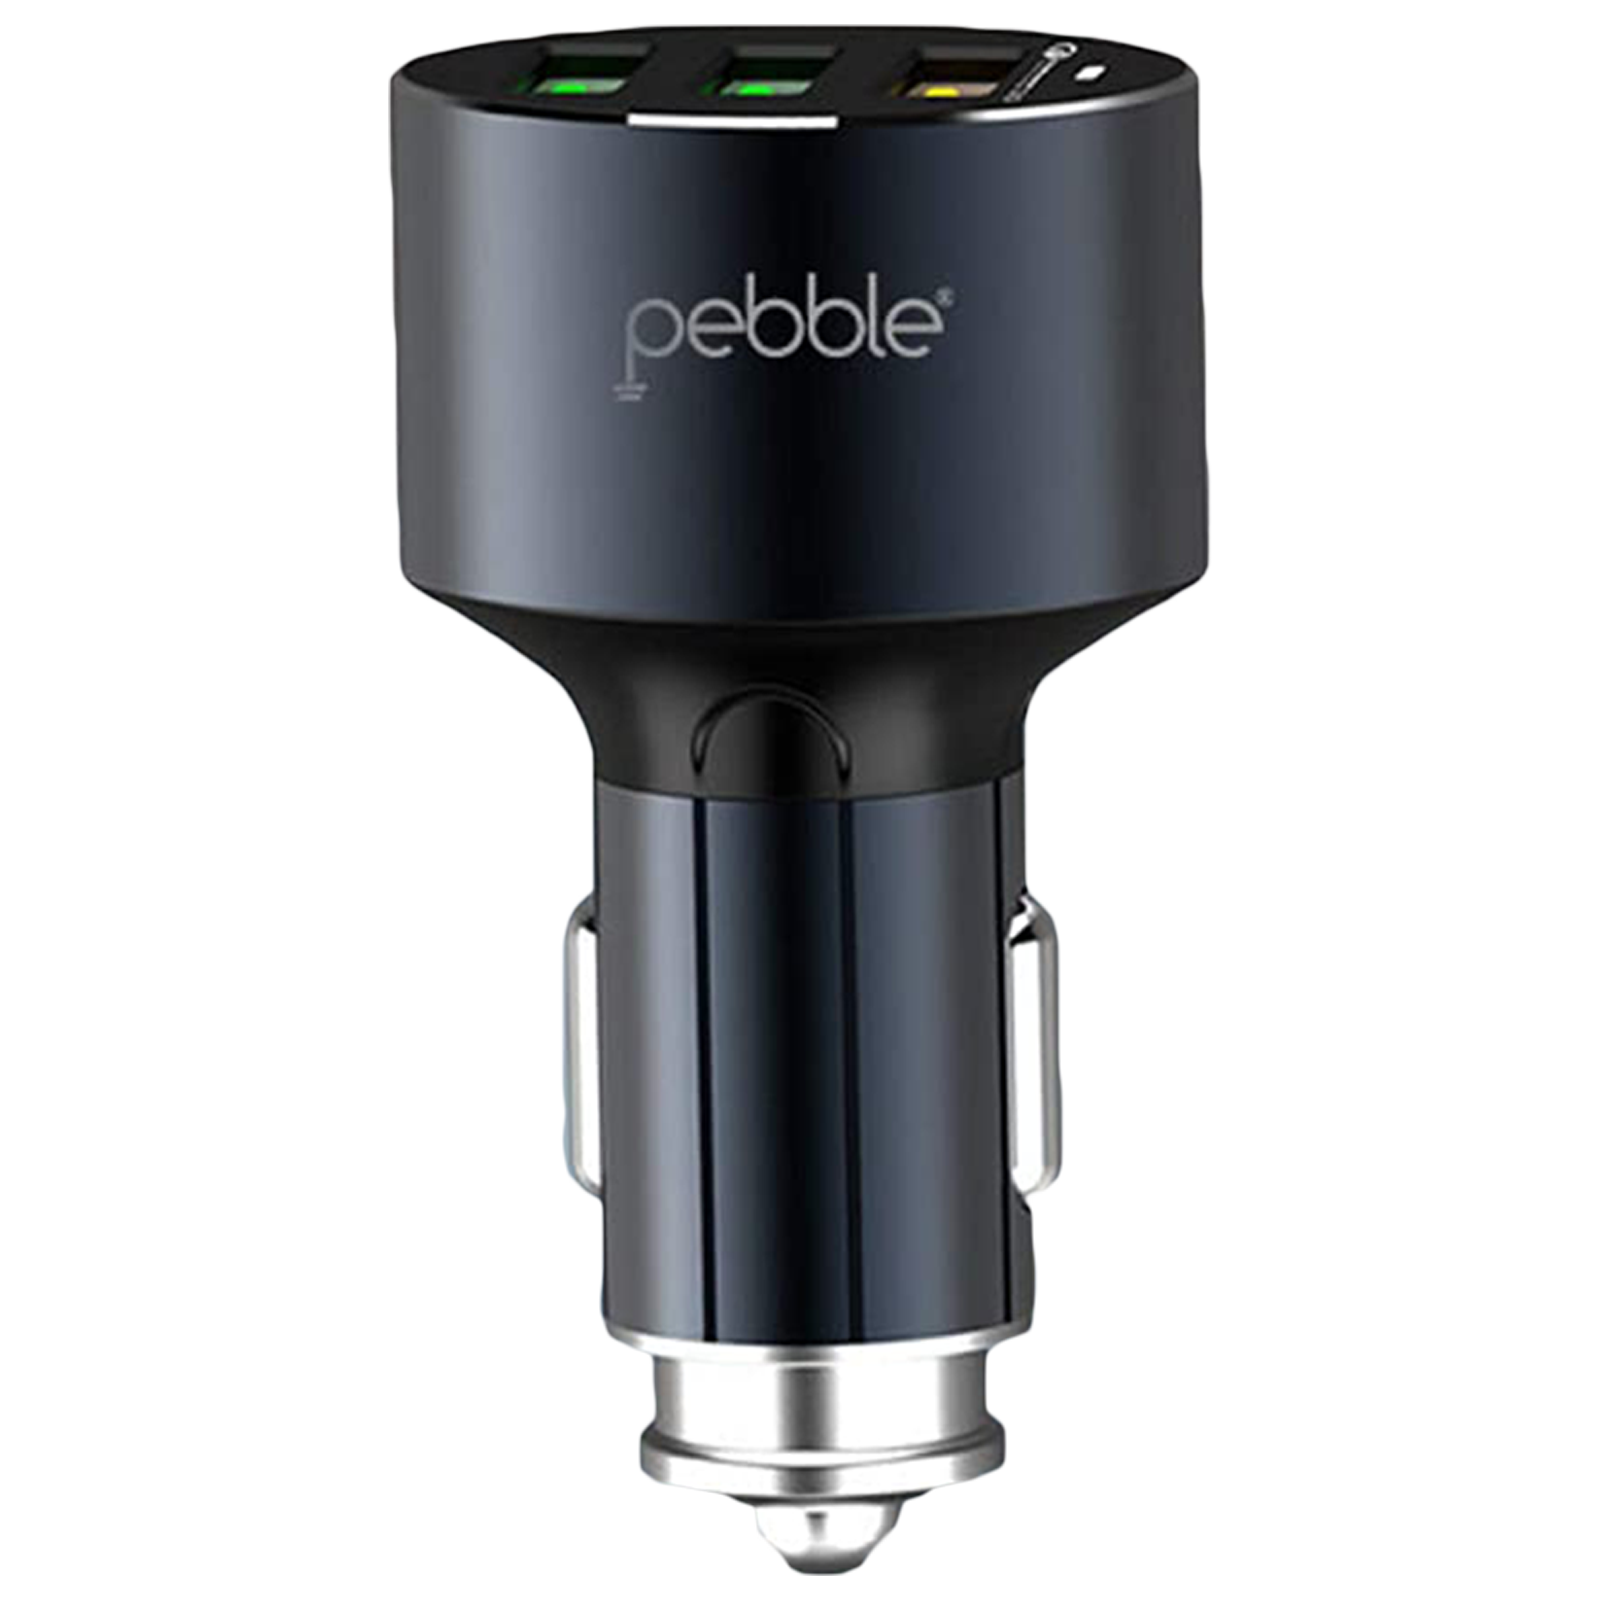 Pebble 36 Watts/3.6 Amps 3 USB Ports Car Charging Adapter with Cable (Quick Charge 3.0 Support, PCC3Q, Black)